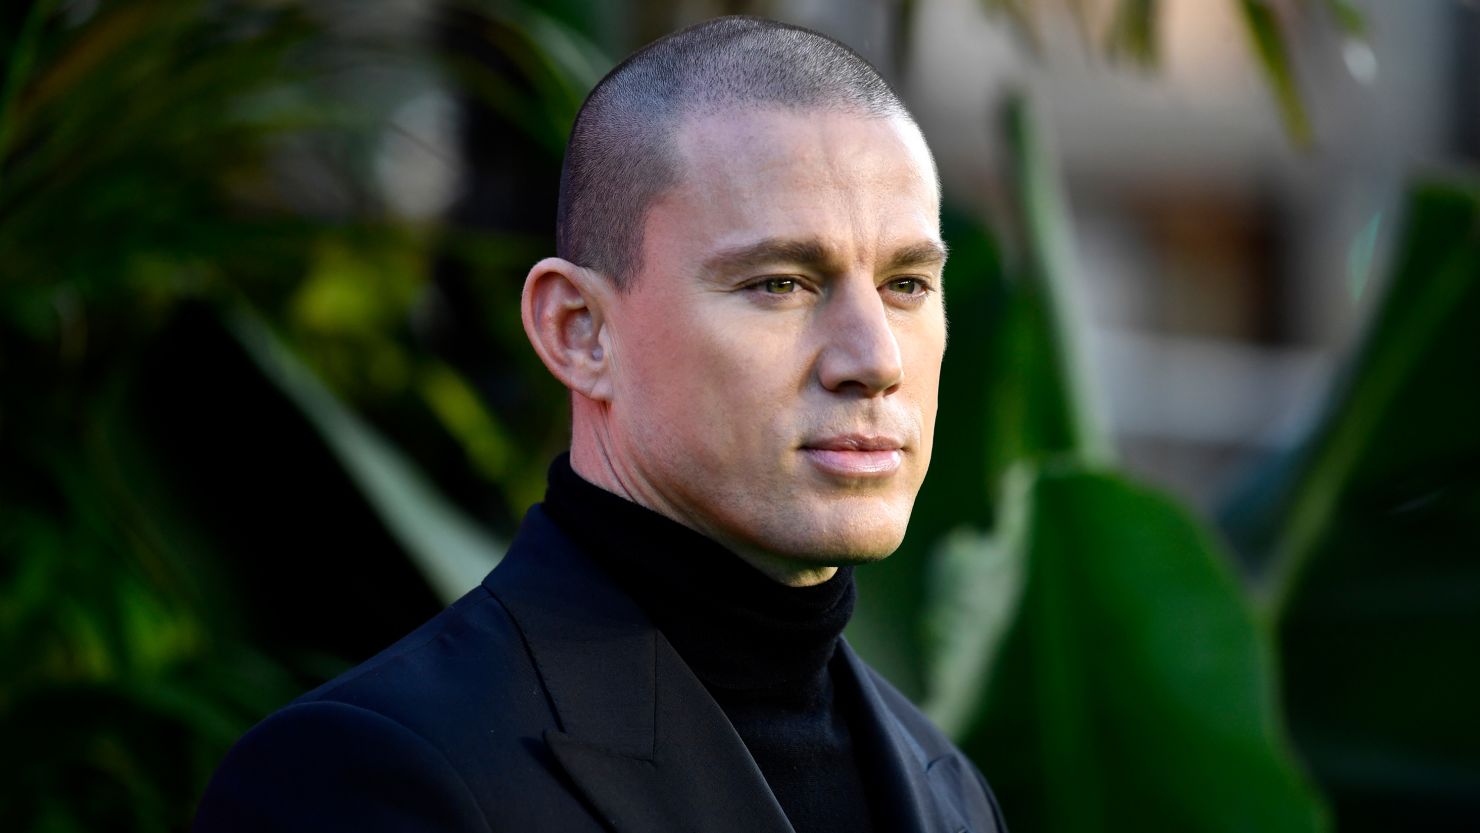 Channing Tatum, seen here at a screening of 'The Lost City' on March 31, 2022 in London, says his production company is considering a remake of the 1990 classic film 'Ghost.'